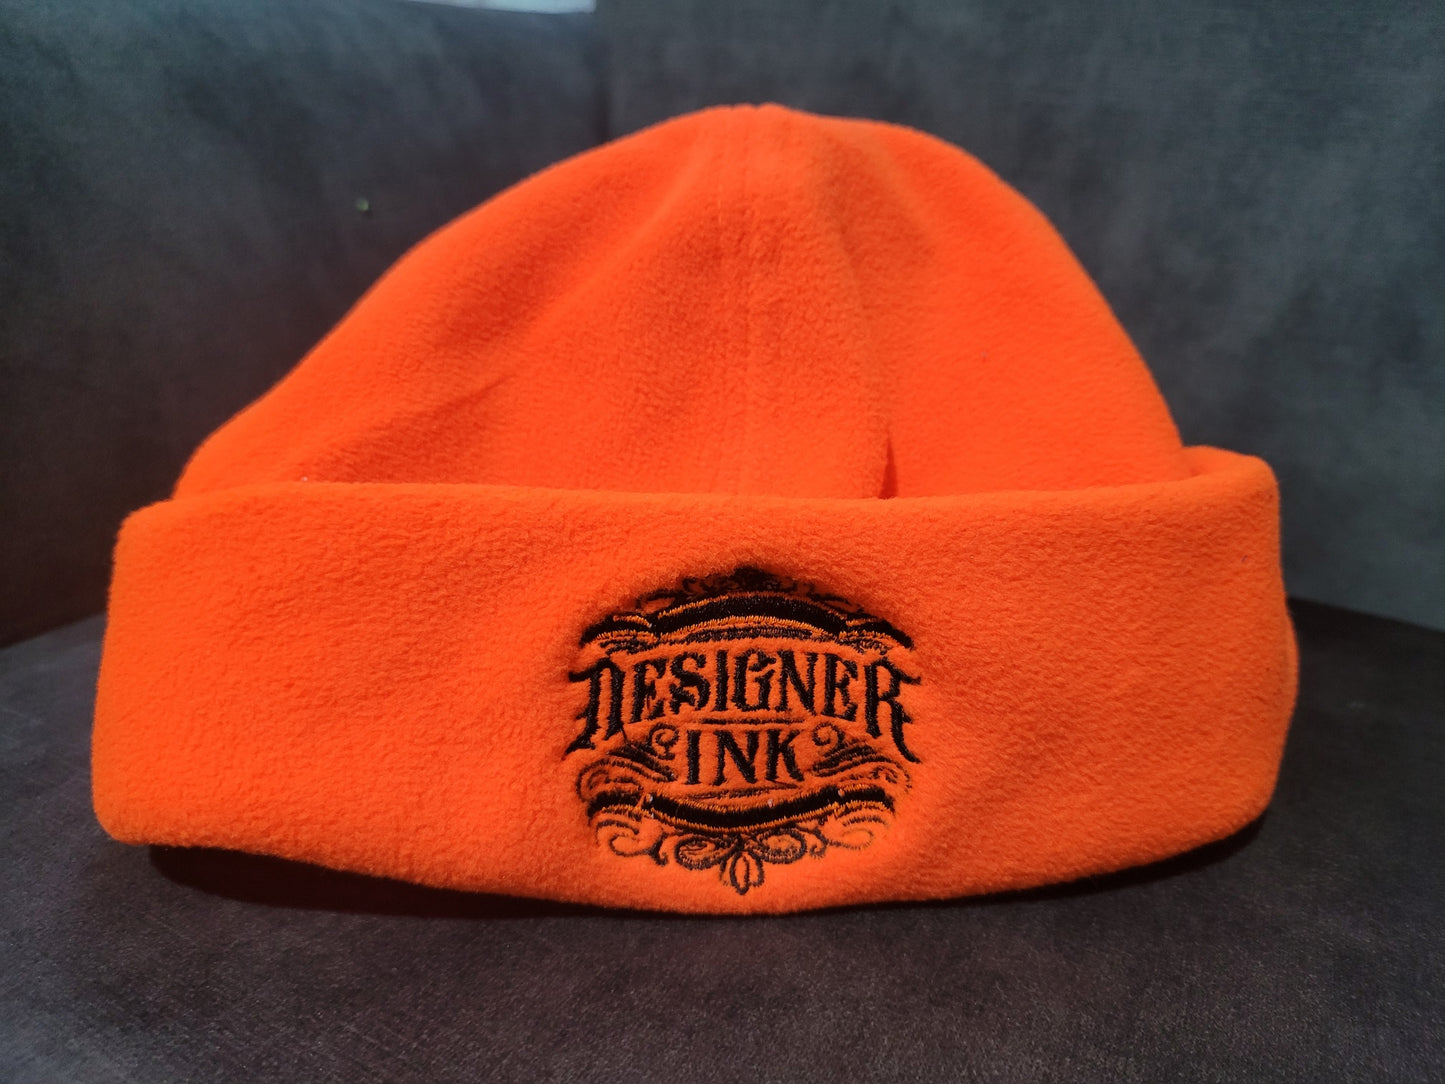 Tradie Safety Beanies